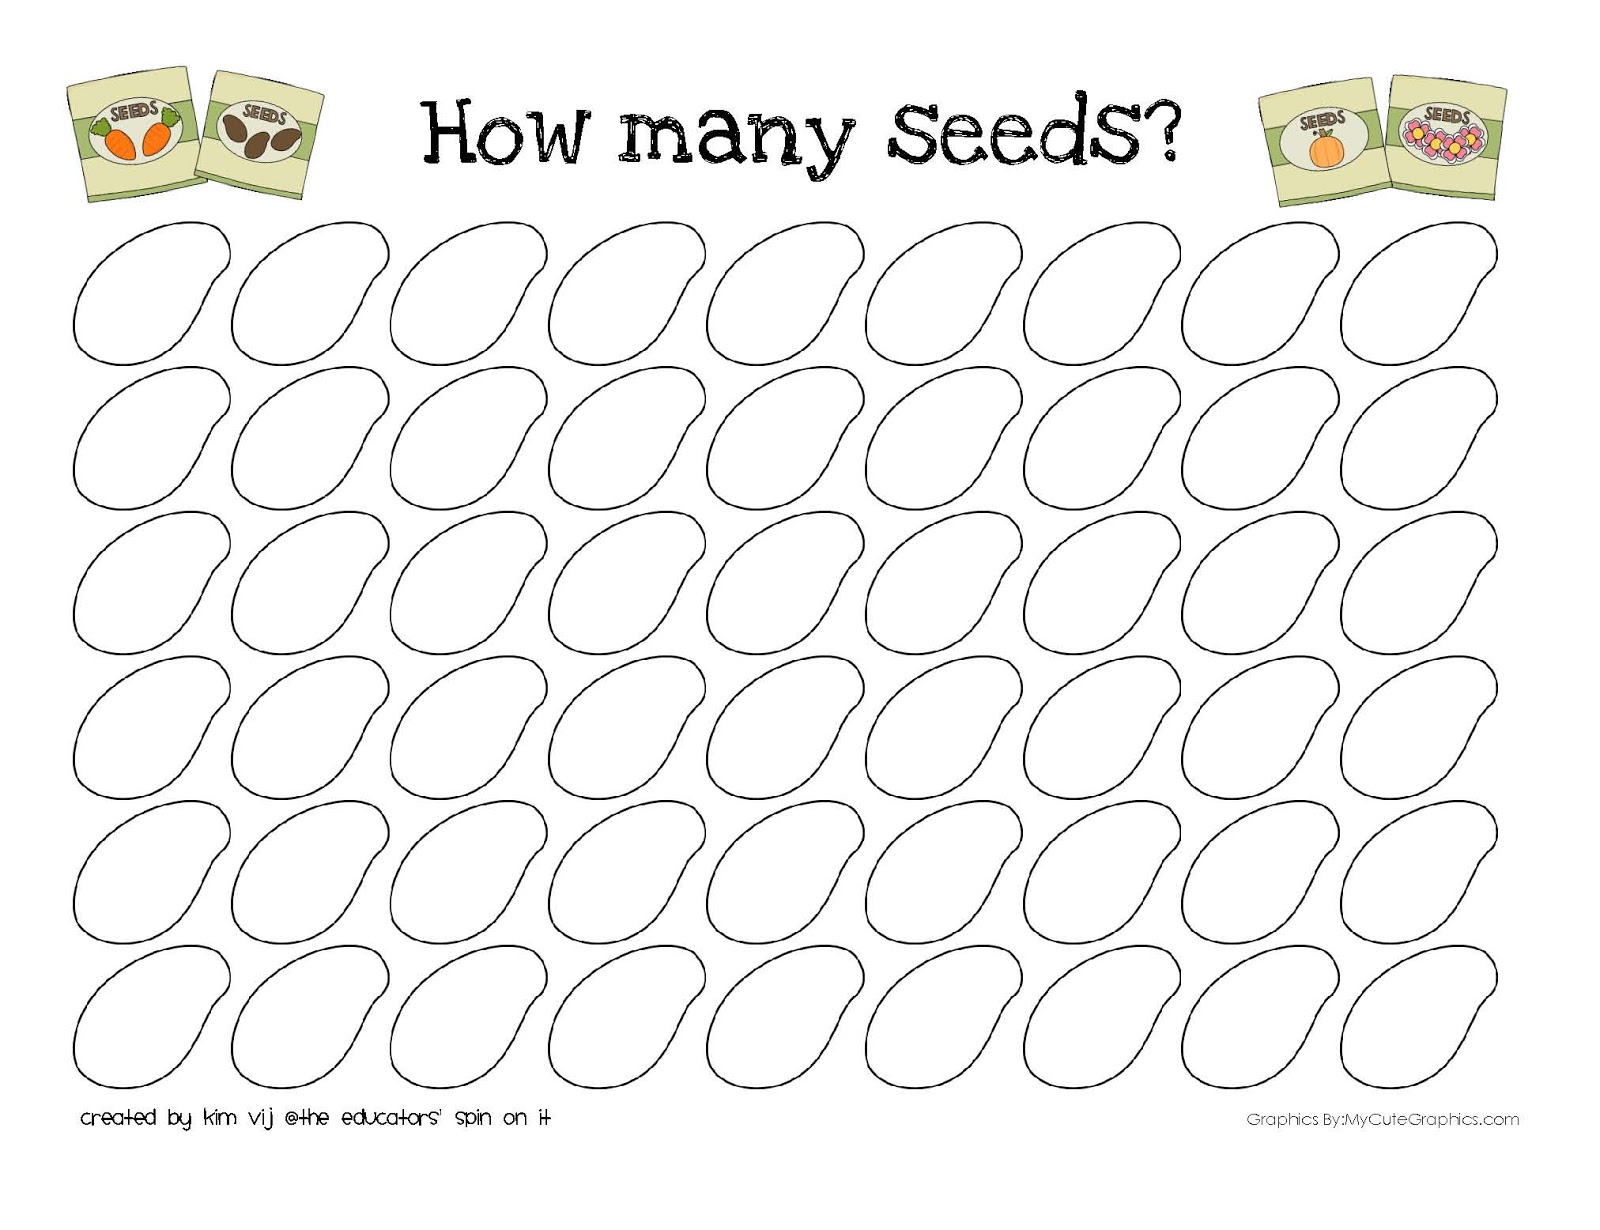 the-educators-spin-on-it-printable-seed-activities-inspired-by-the